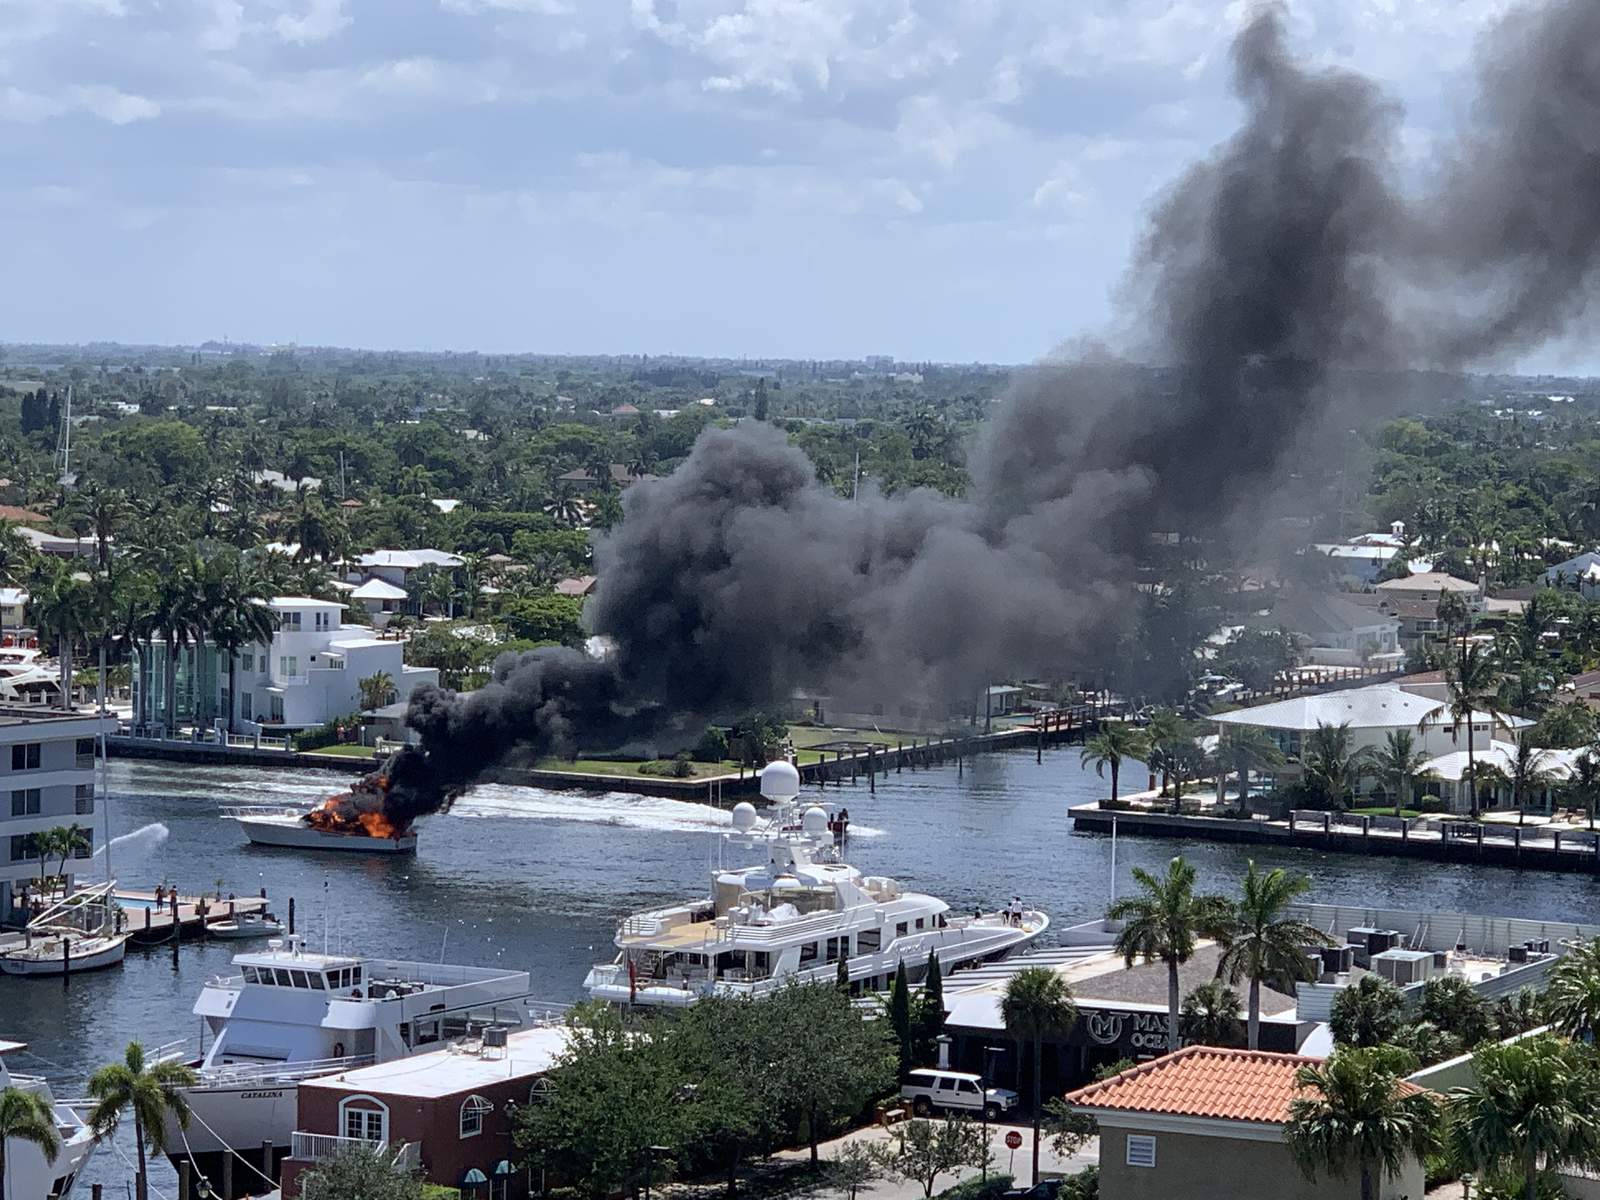 60-foot boat catches fire in Fort Lauderdale intracoastal waterway